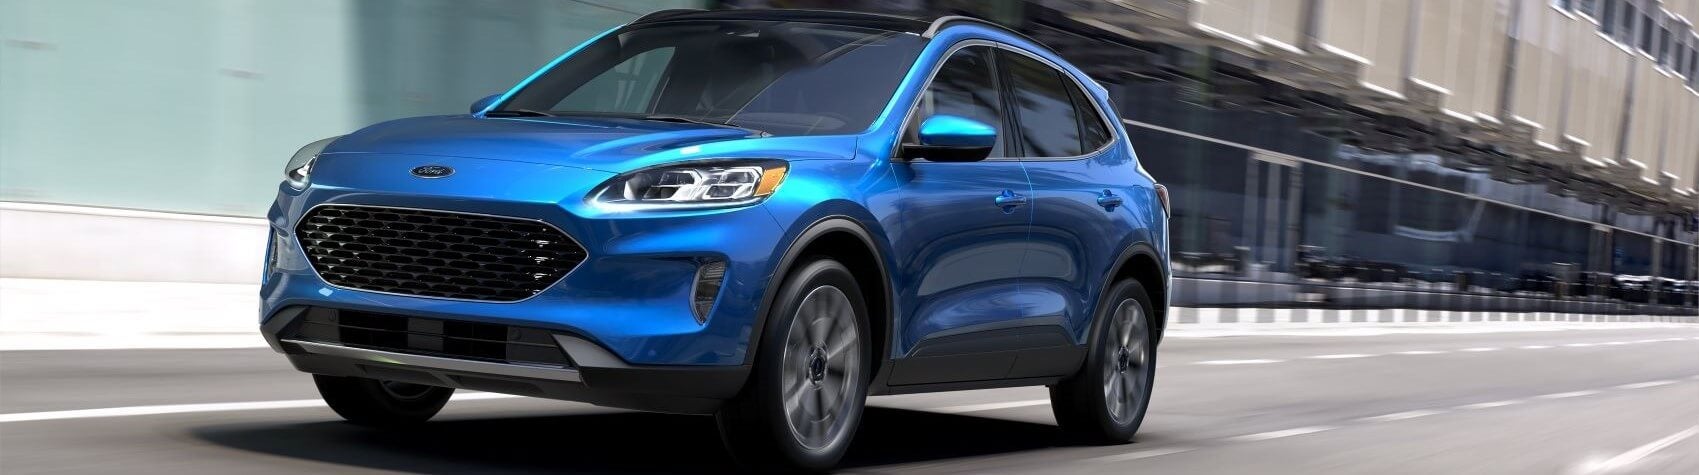 2022 Ford Escape in Blue Snipped